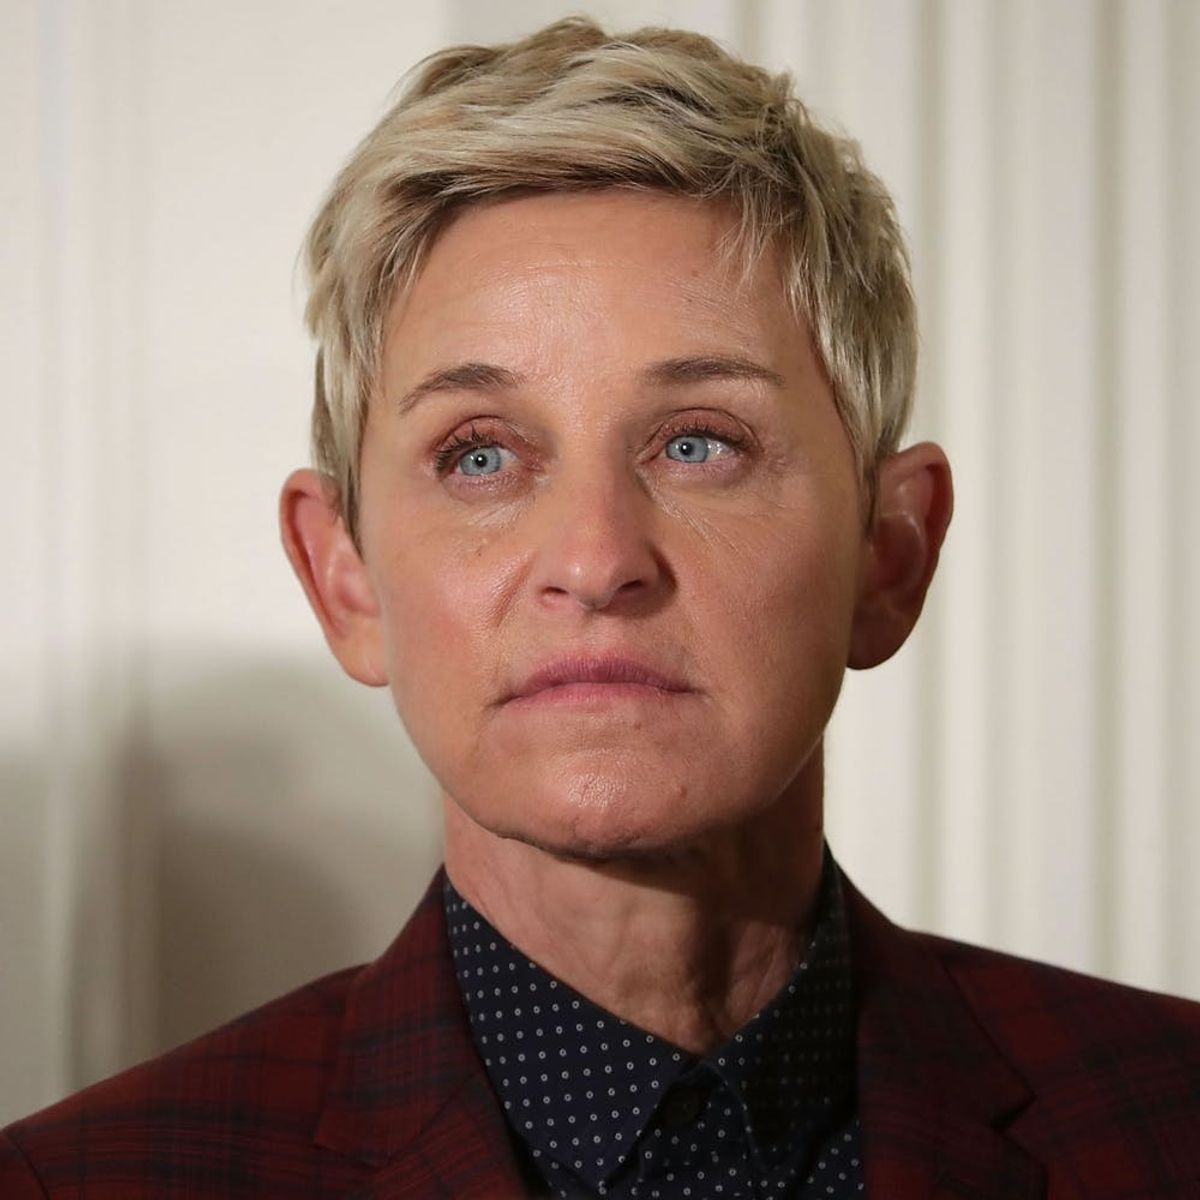 Ellen DeGeneres Mourns Her Father’s Death in Moving Tribute